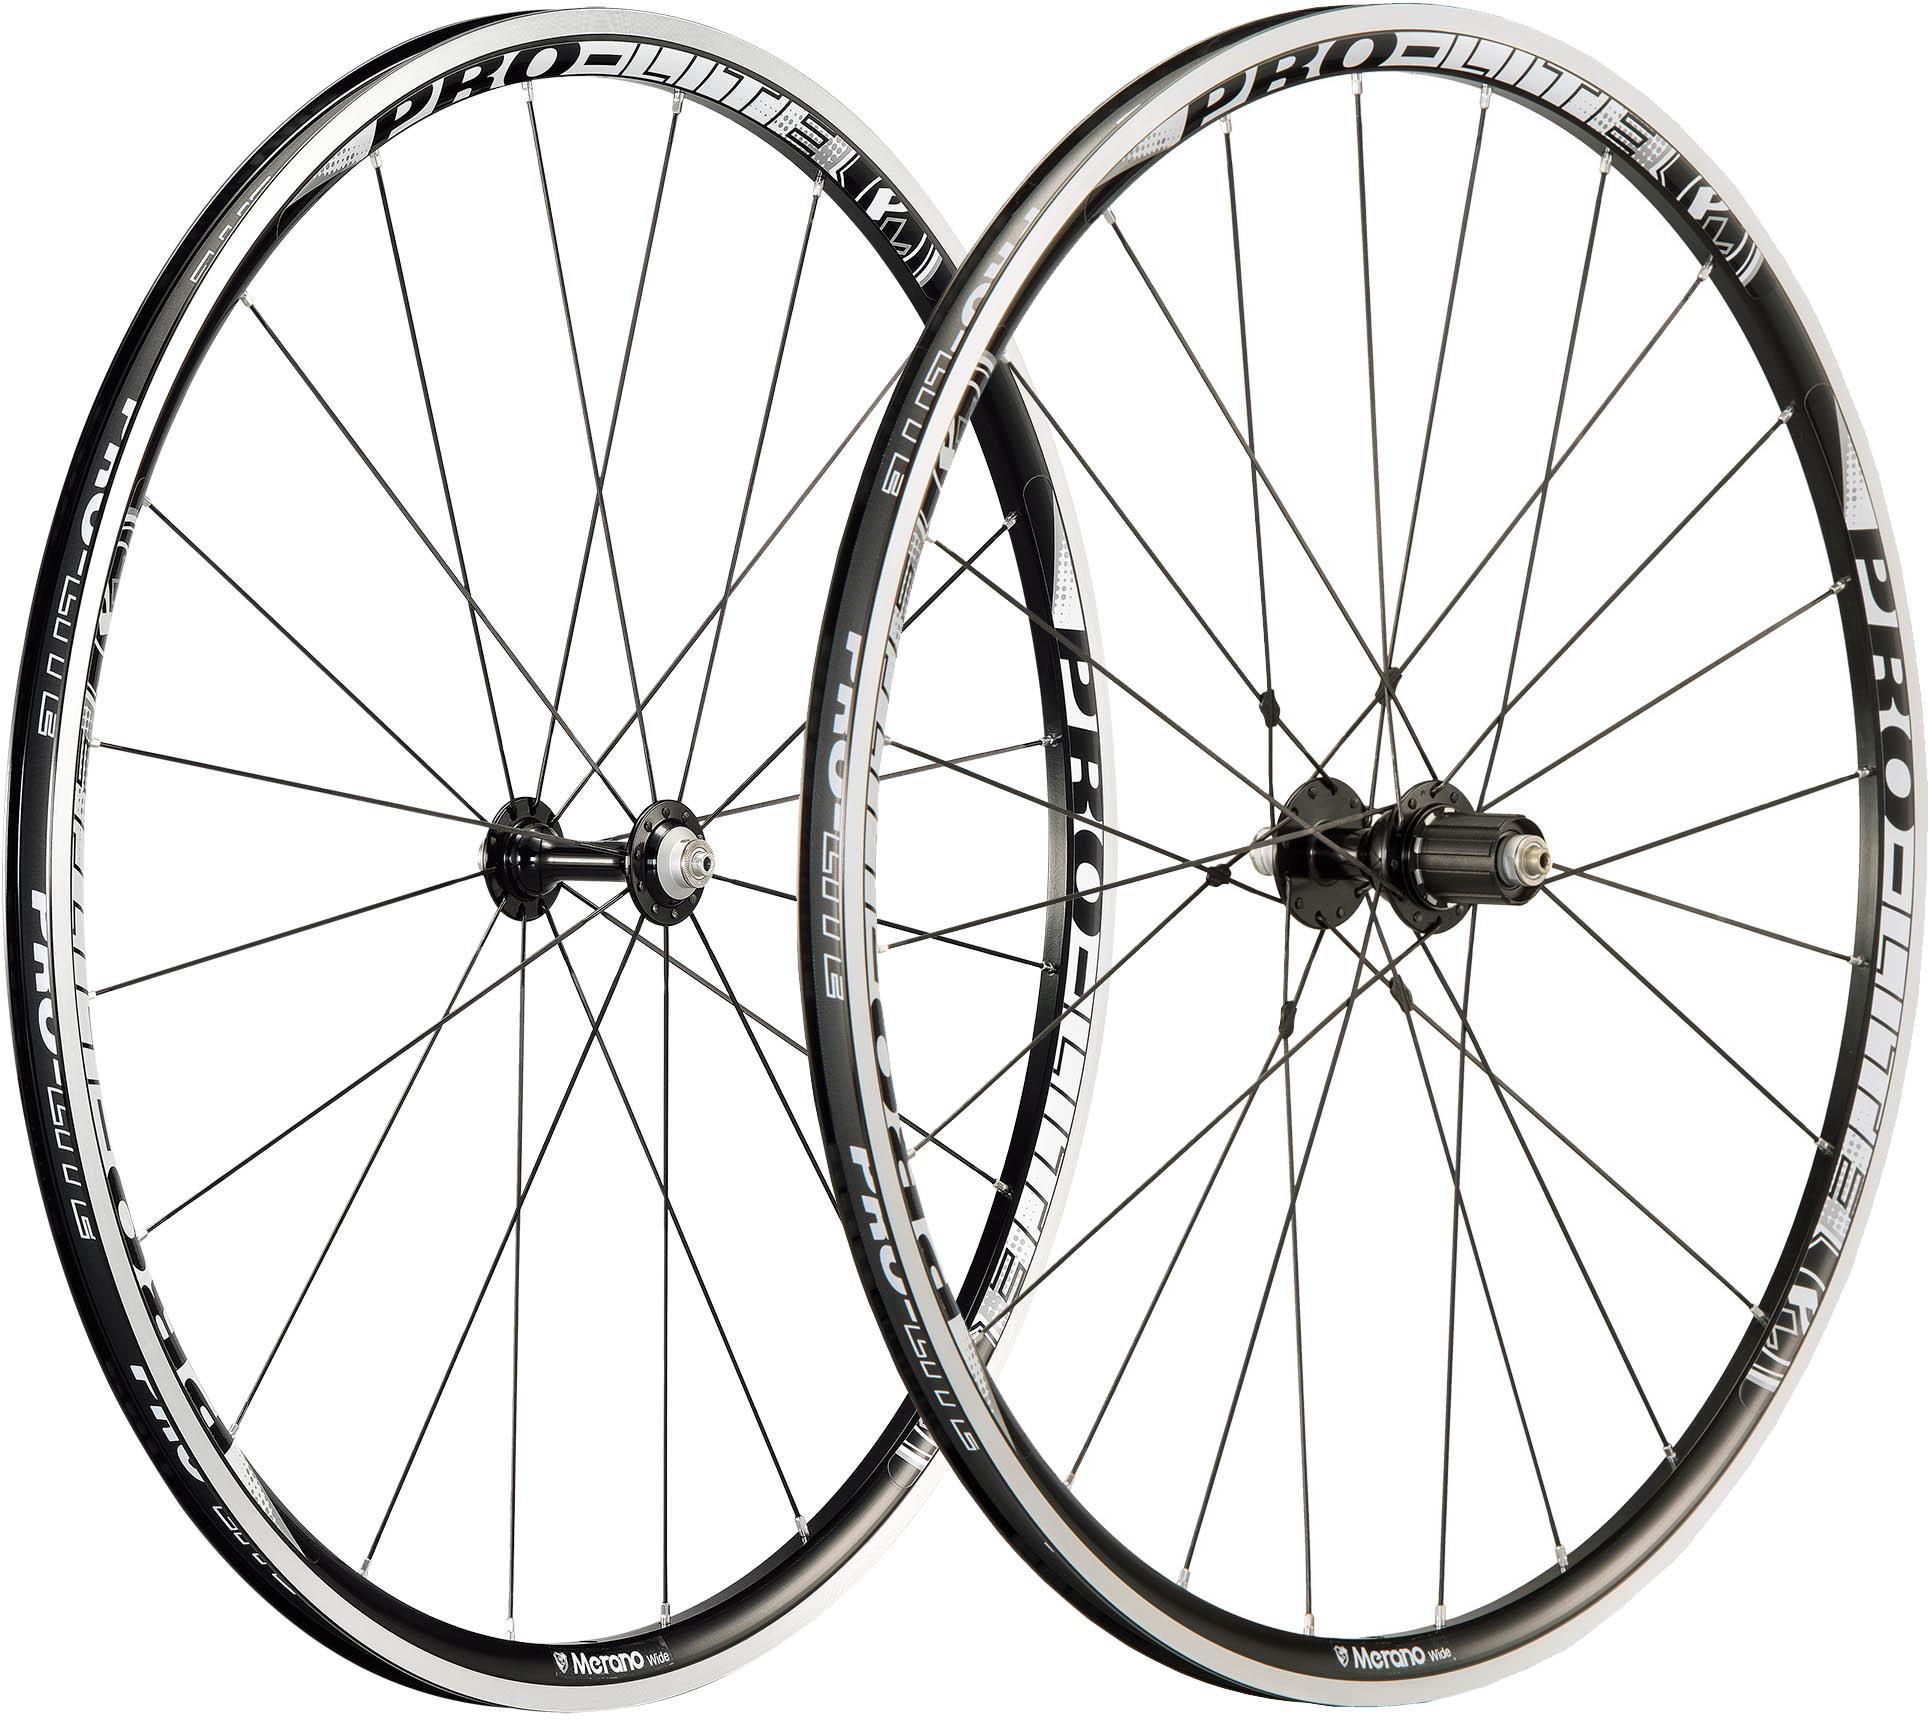 Image of Pro Lite Merano A25W Alloy Road Wheelset - Black and White